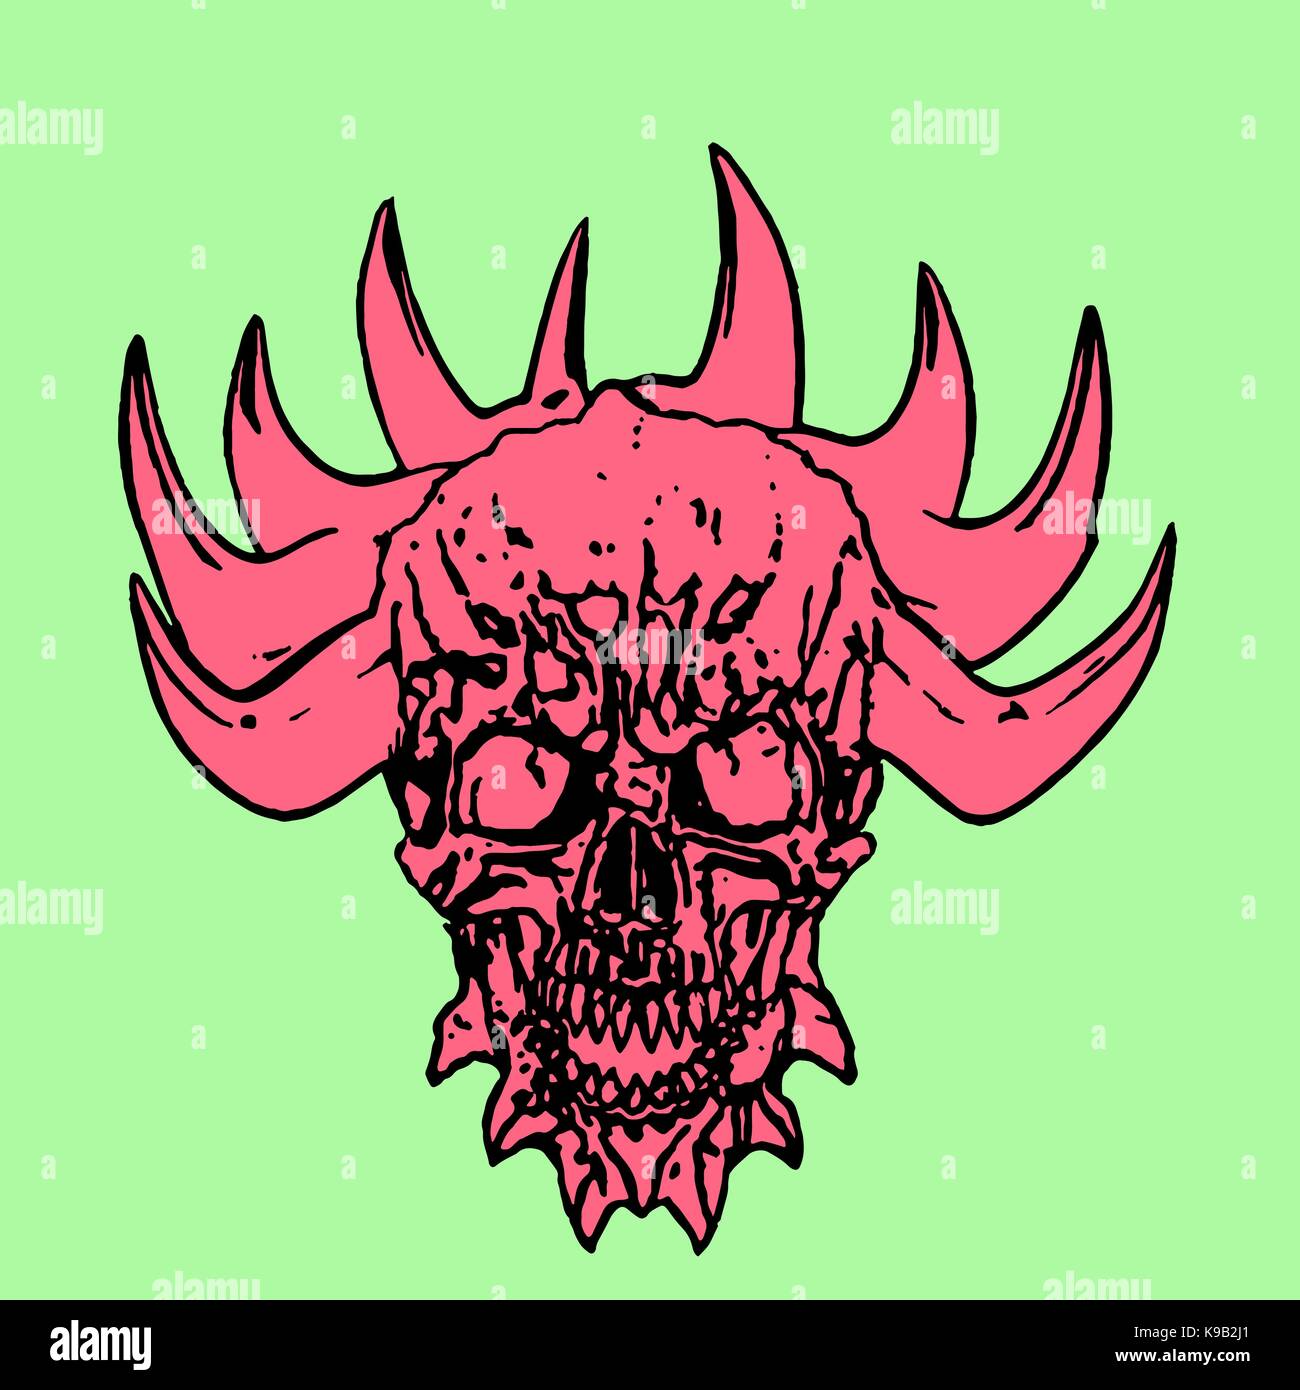 Red skull of a demon with crown of thorns. Vector illustration on green background. Stock Vector